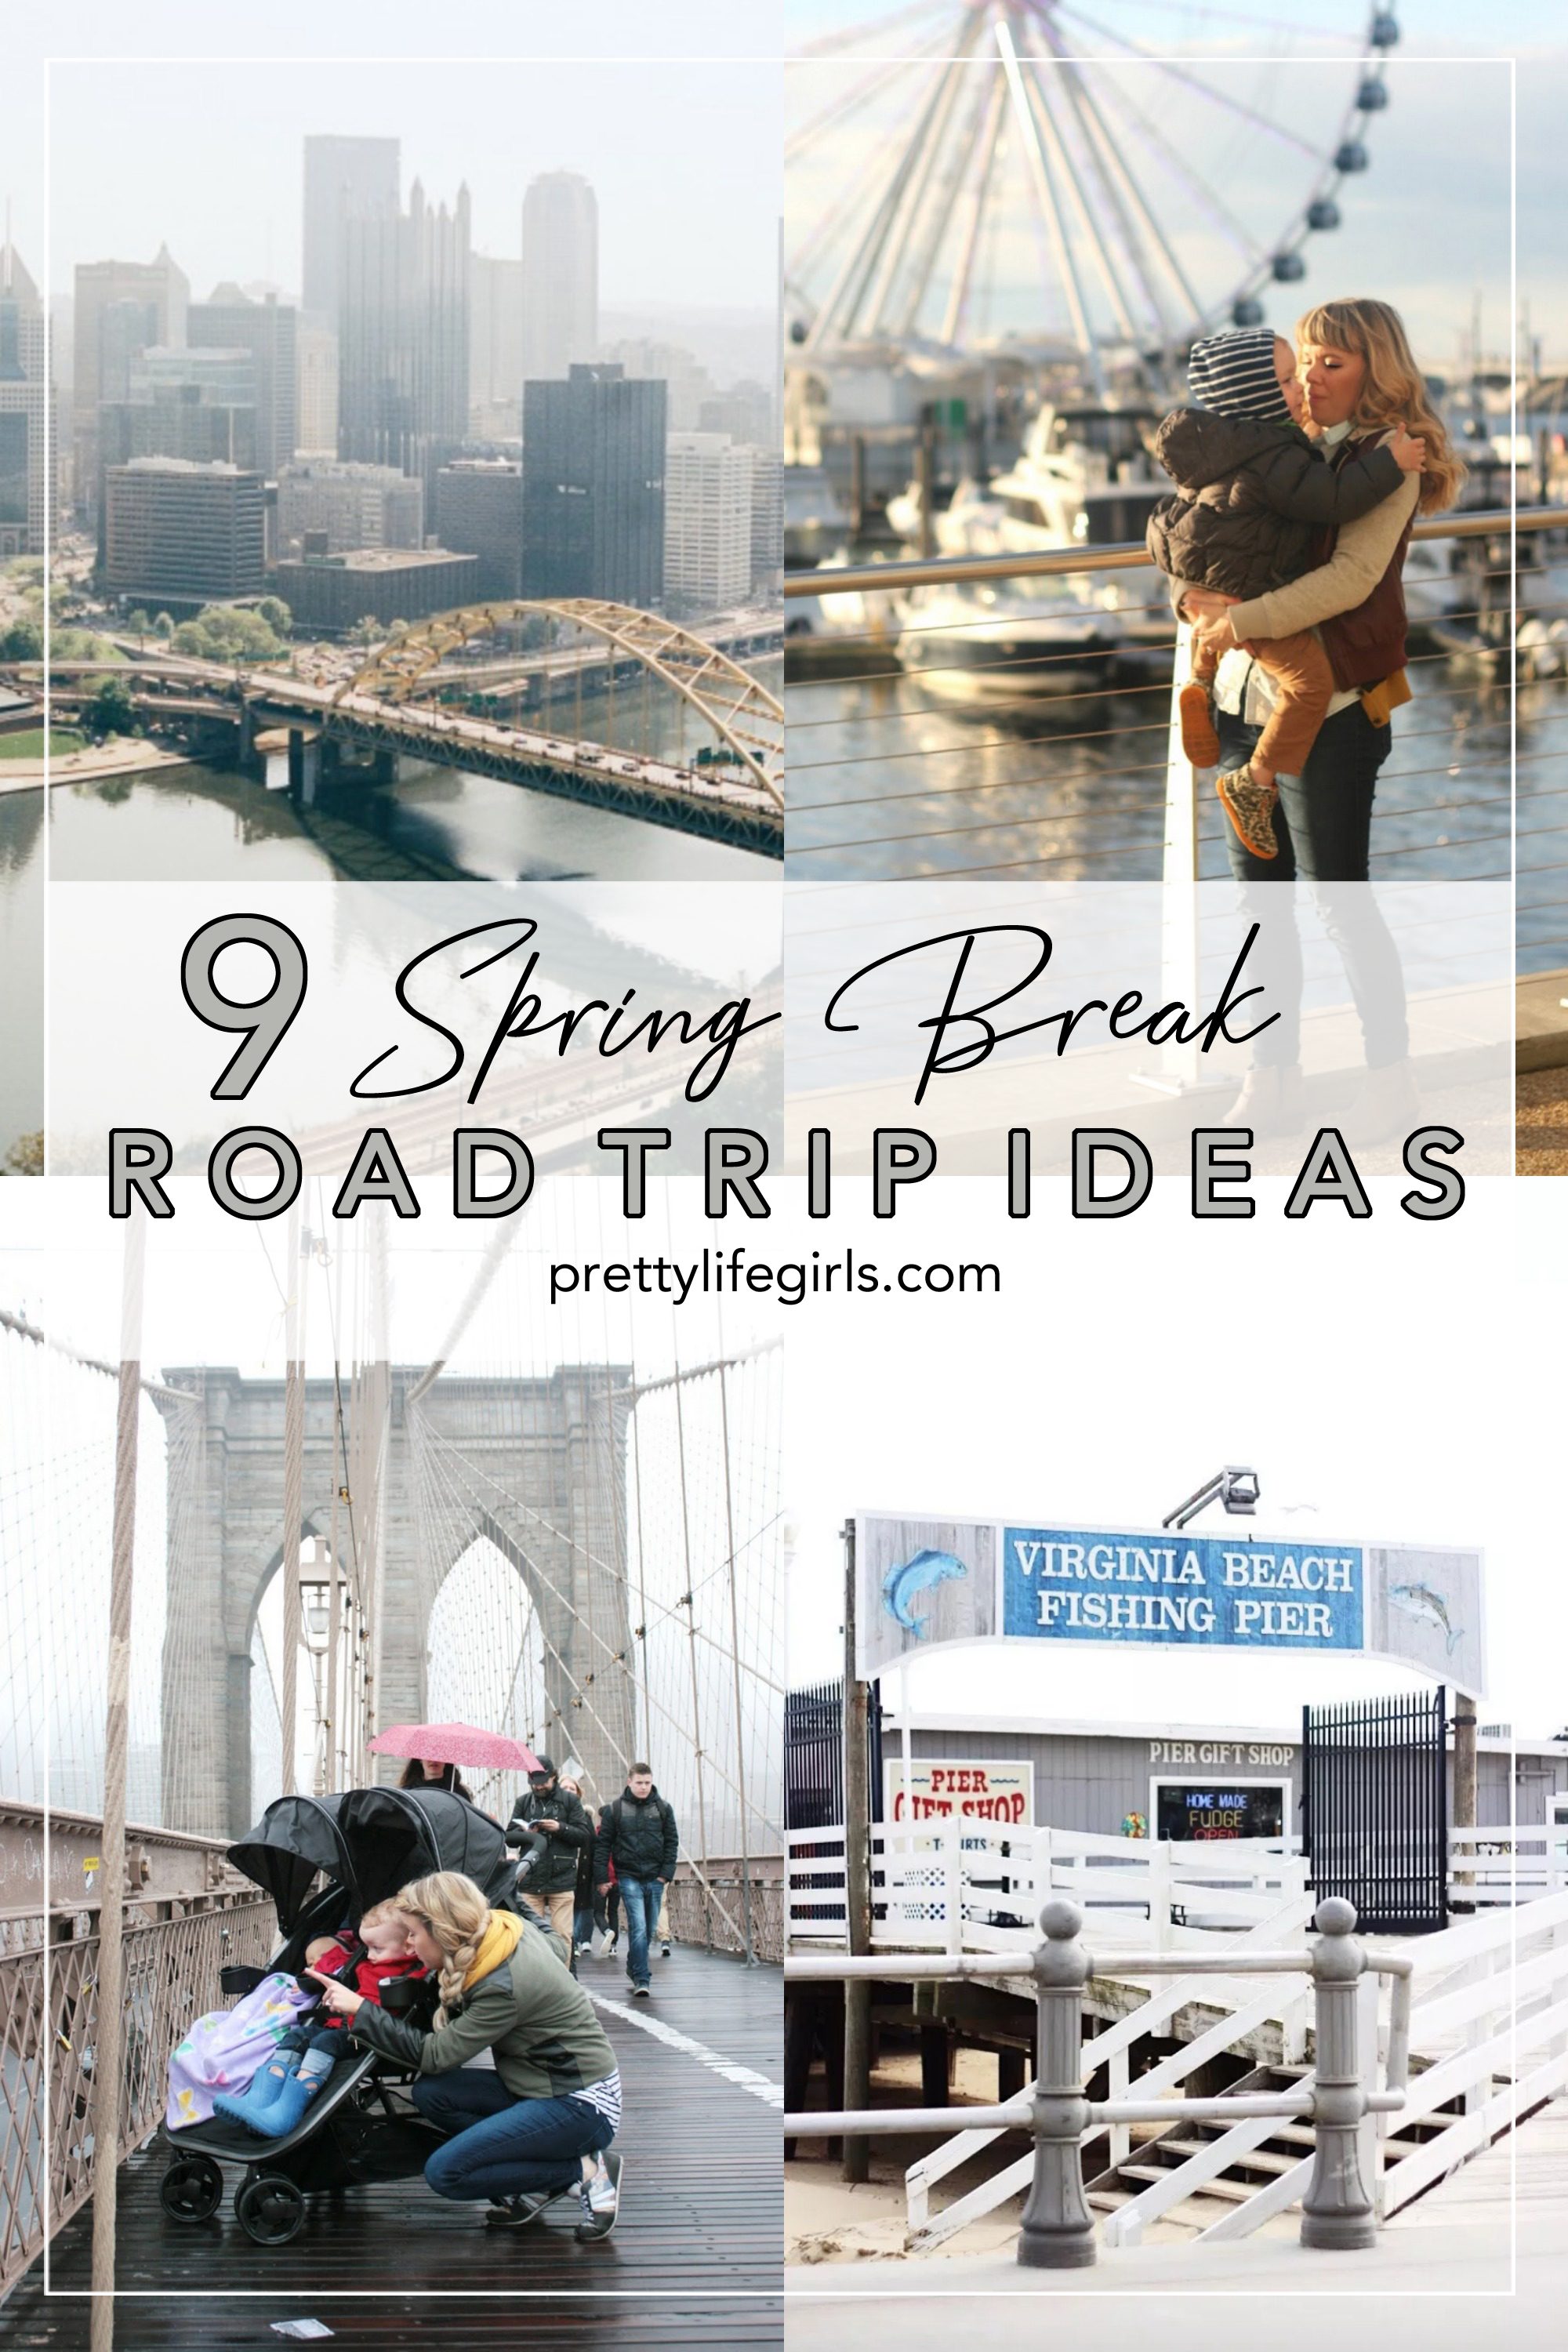 Nine Spring Break Road Trip Ideas + featured by Top US Craft Blog + The Pretty Life Girls: Travel Guide